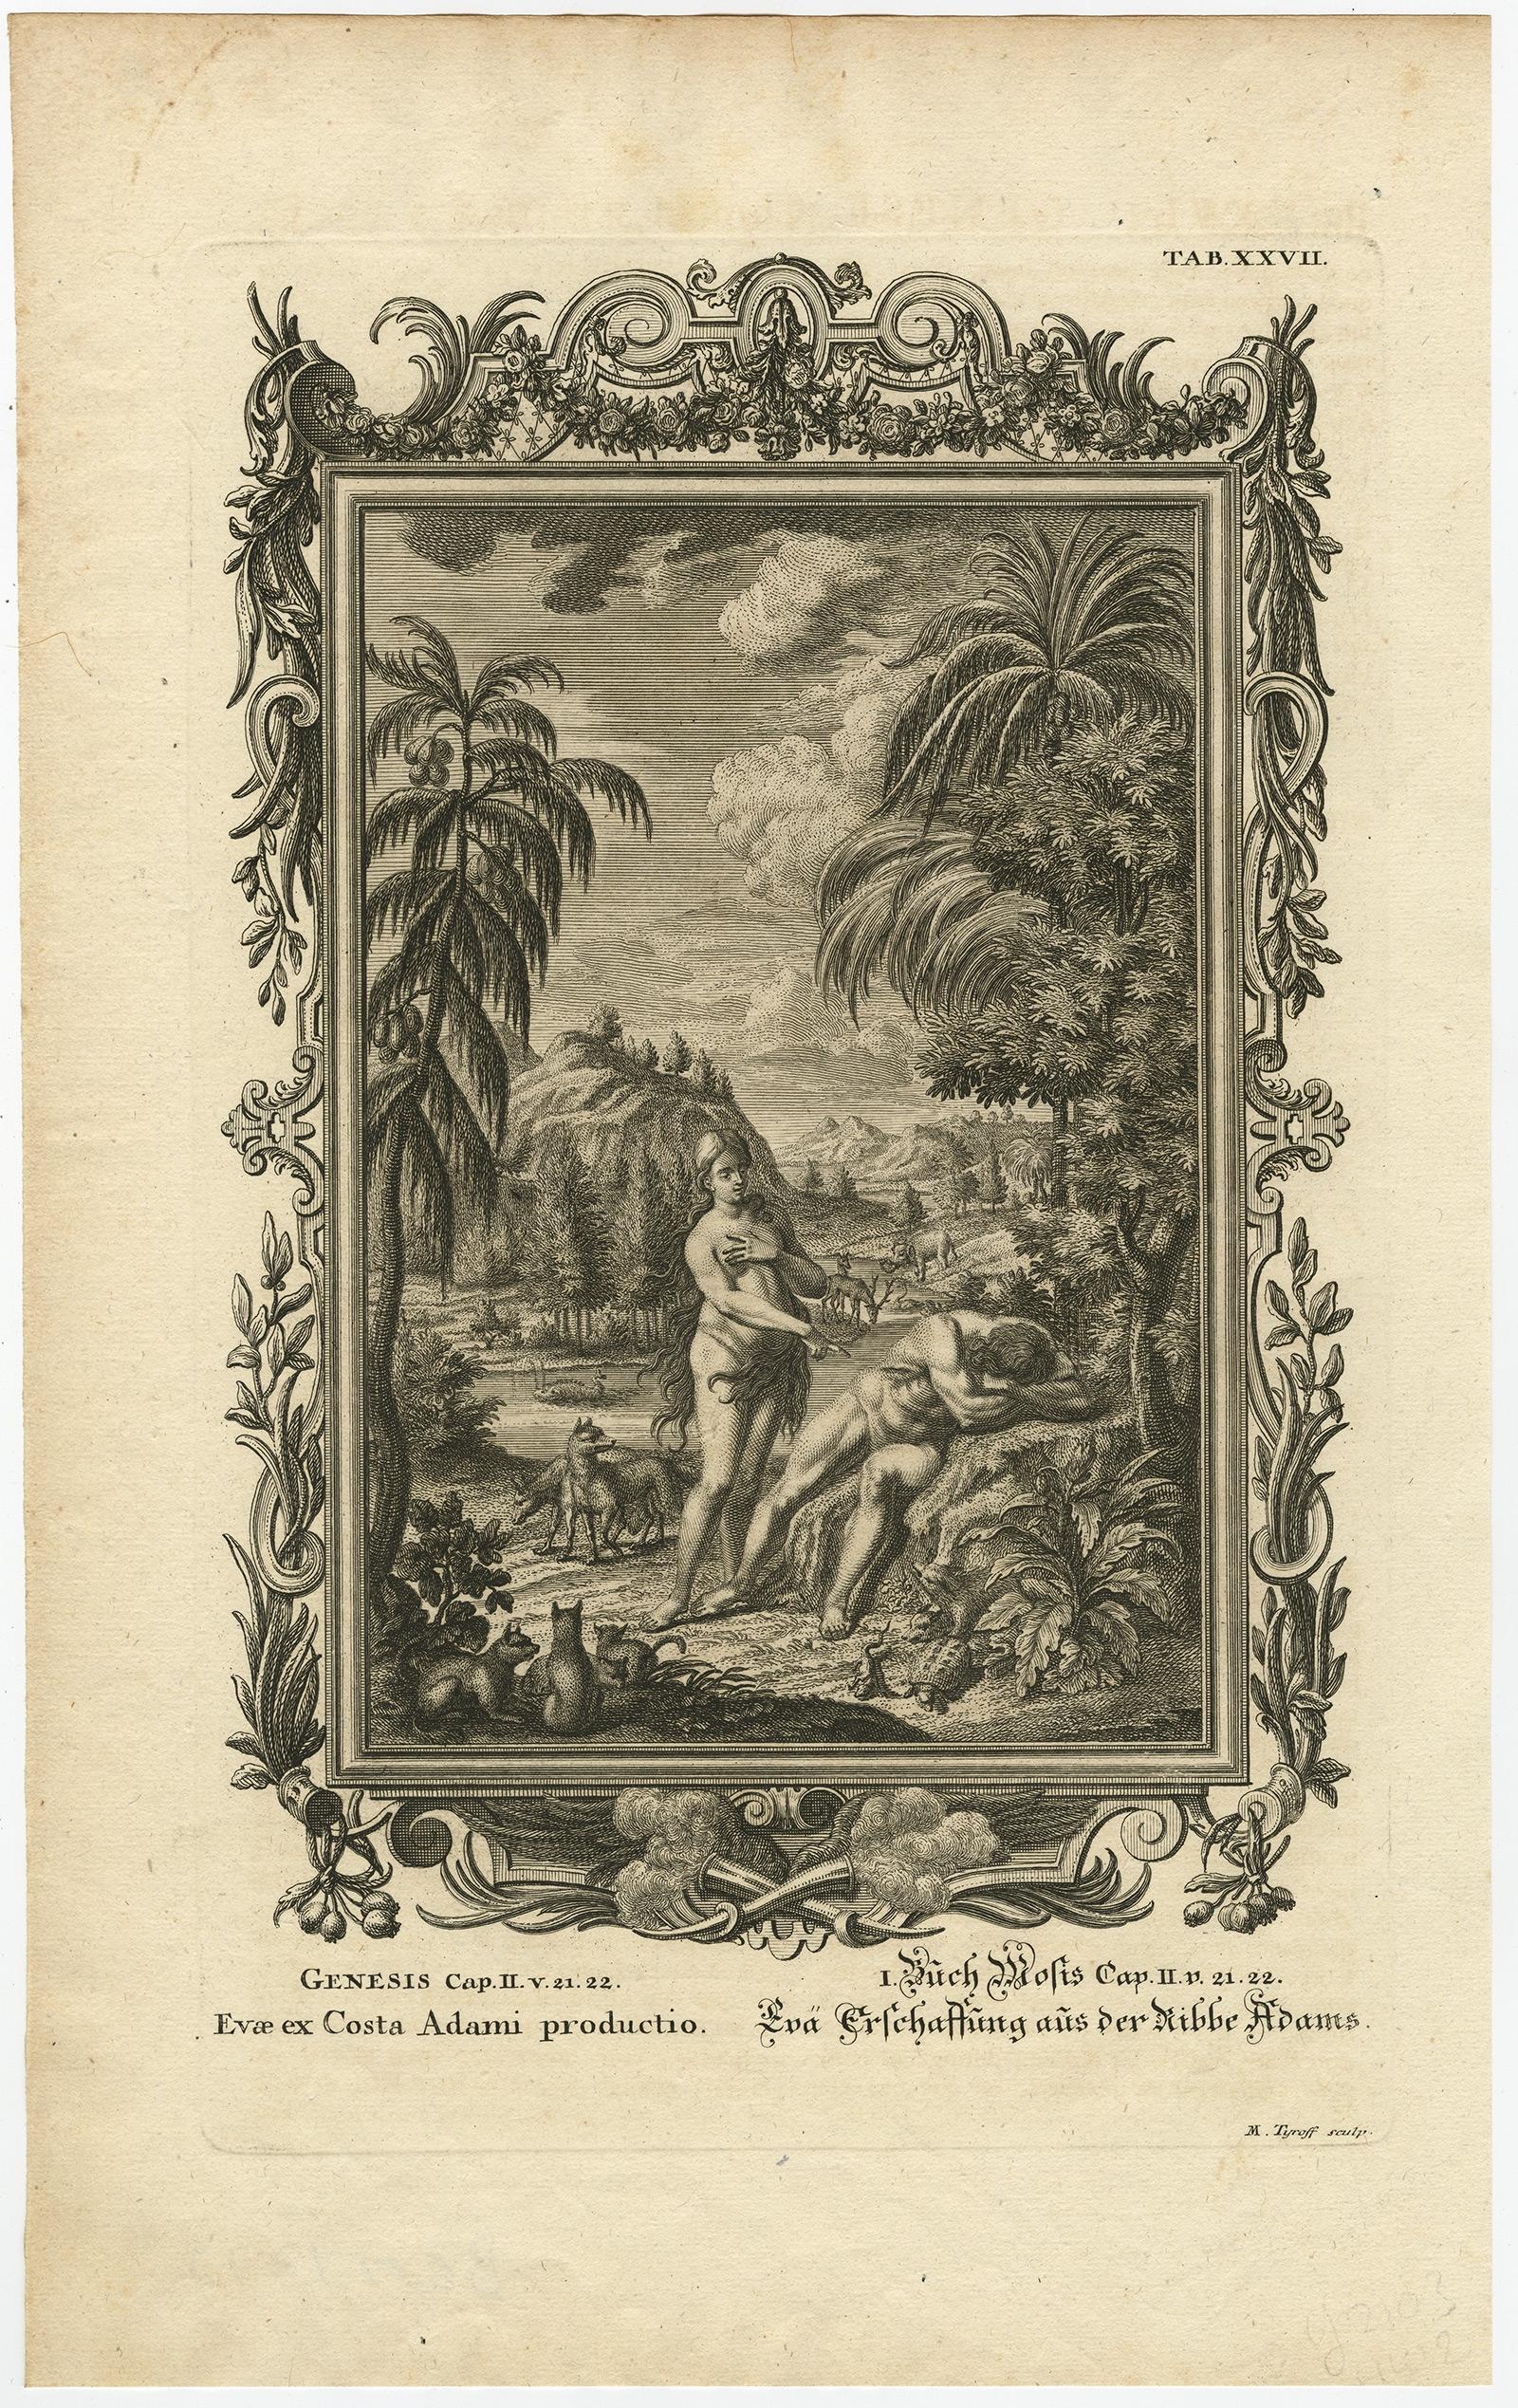 Antique print titled 'Evae ex Costa Adami productio (..). 

This original antique print shows a scene from Genesis in the Old Testament; Eve is made from Adam's rib. Originates from 'Physica Sacra' by Johann Jakob Scheuchzer. Scheuchzer believed